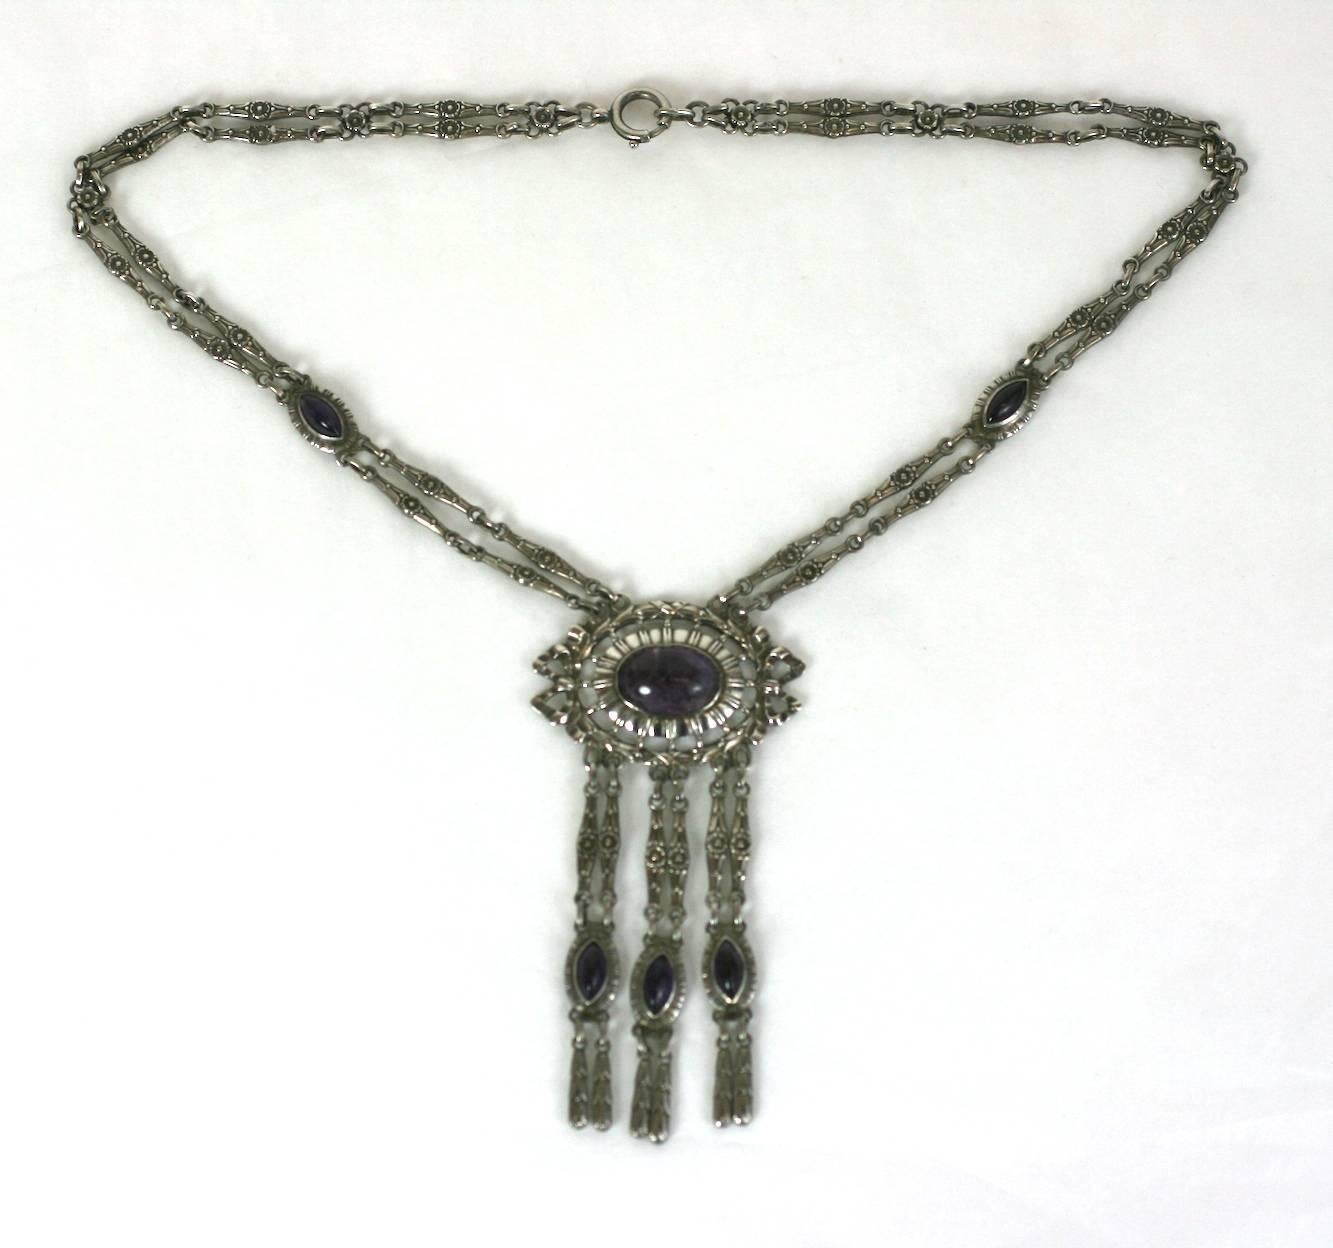 Silver and Amythest Edwardian Necklace of European origin. Lovely Neoclassical motifs are used throughout with navette and oval genuine amythests. Heavy quality construction with lovely swag/ribbon detailing. Germany 1910.
800 grade silver.